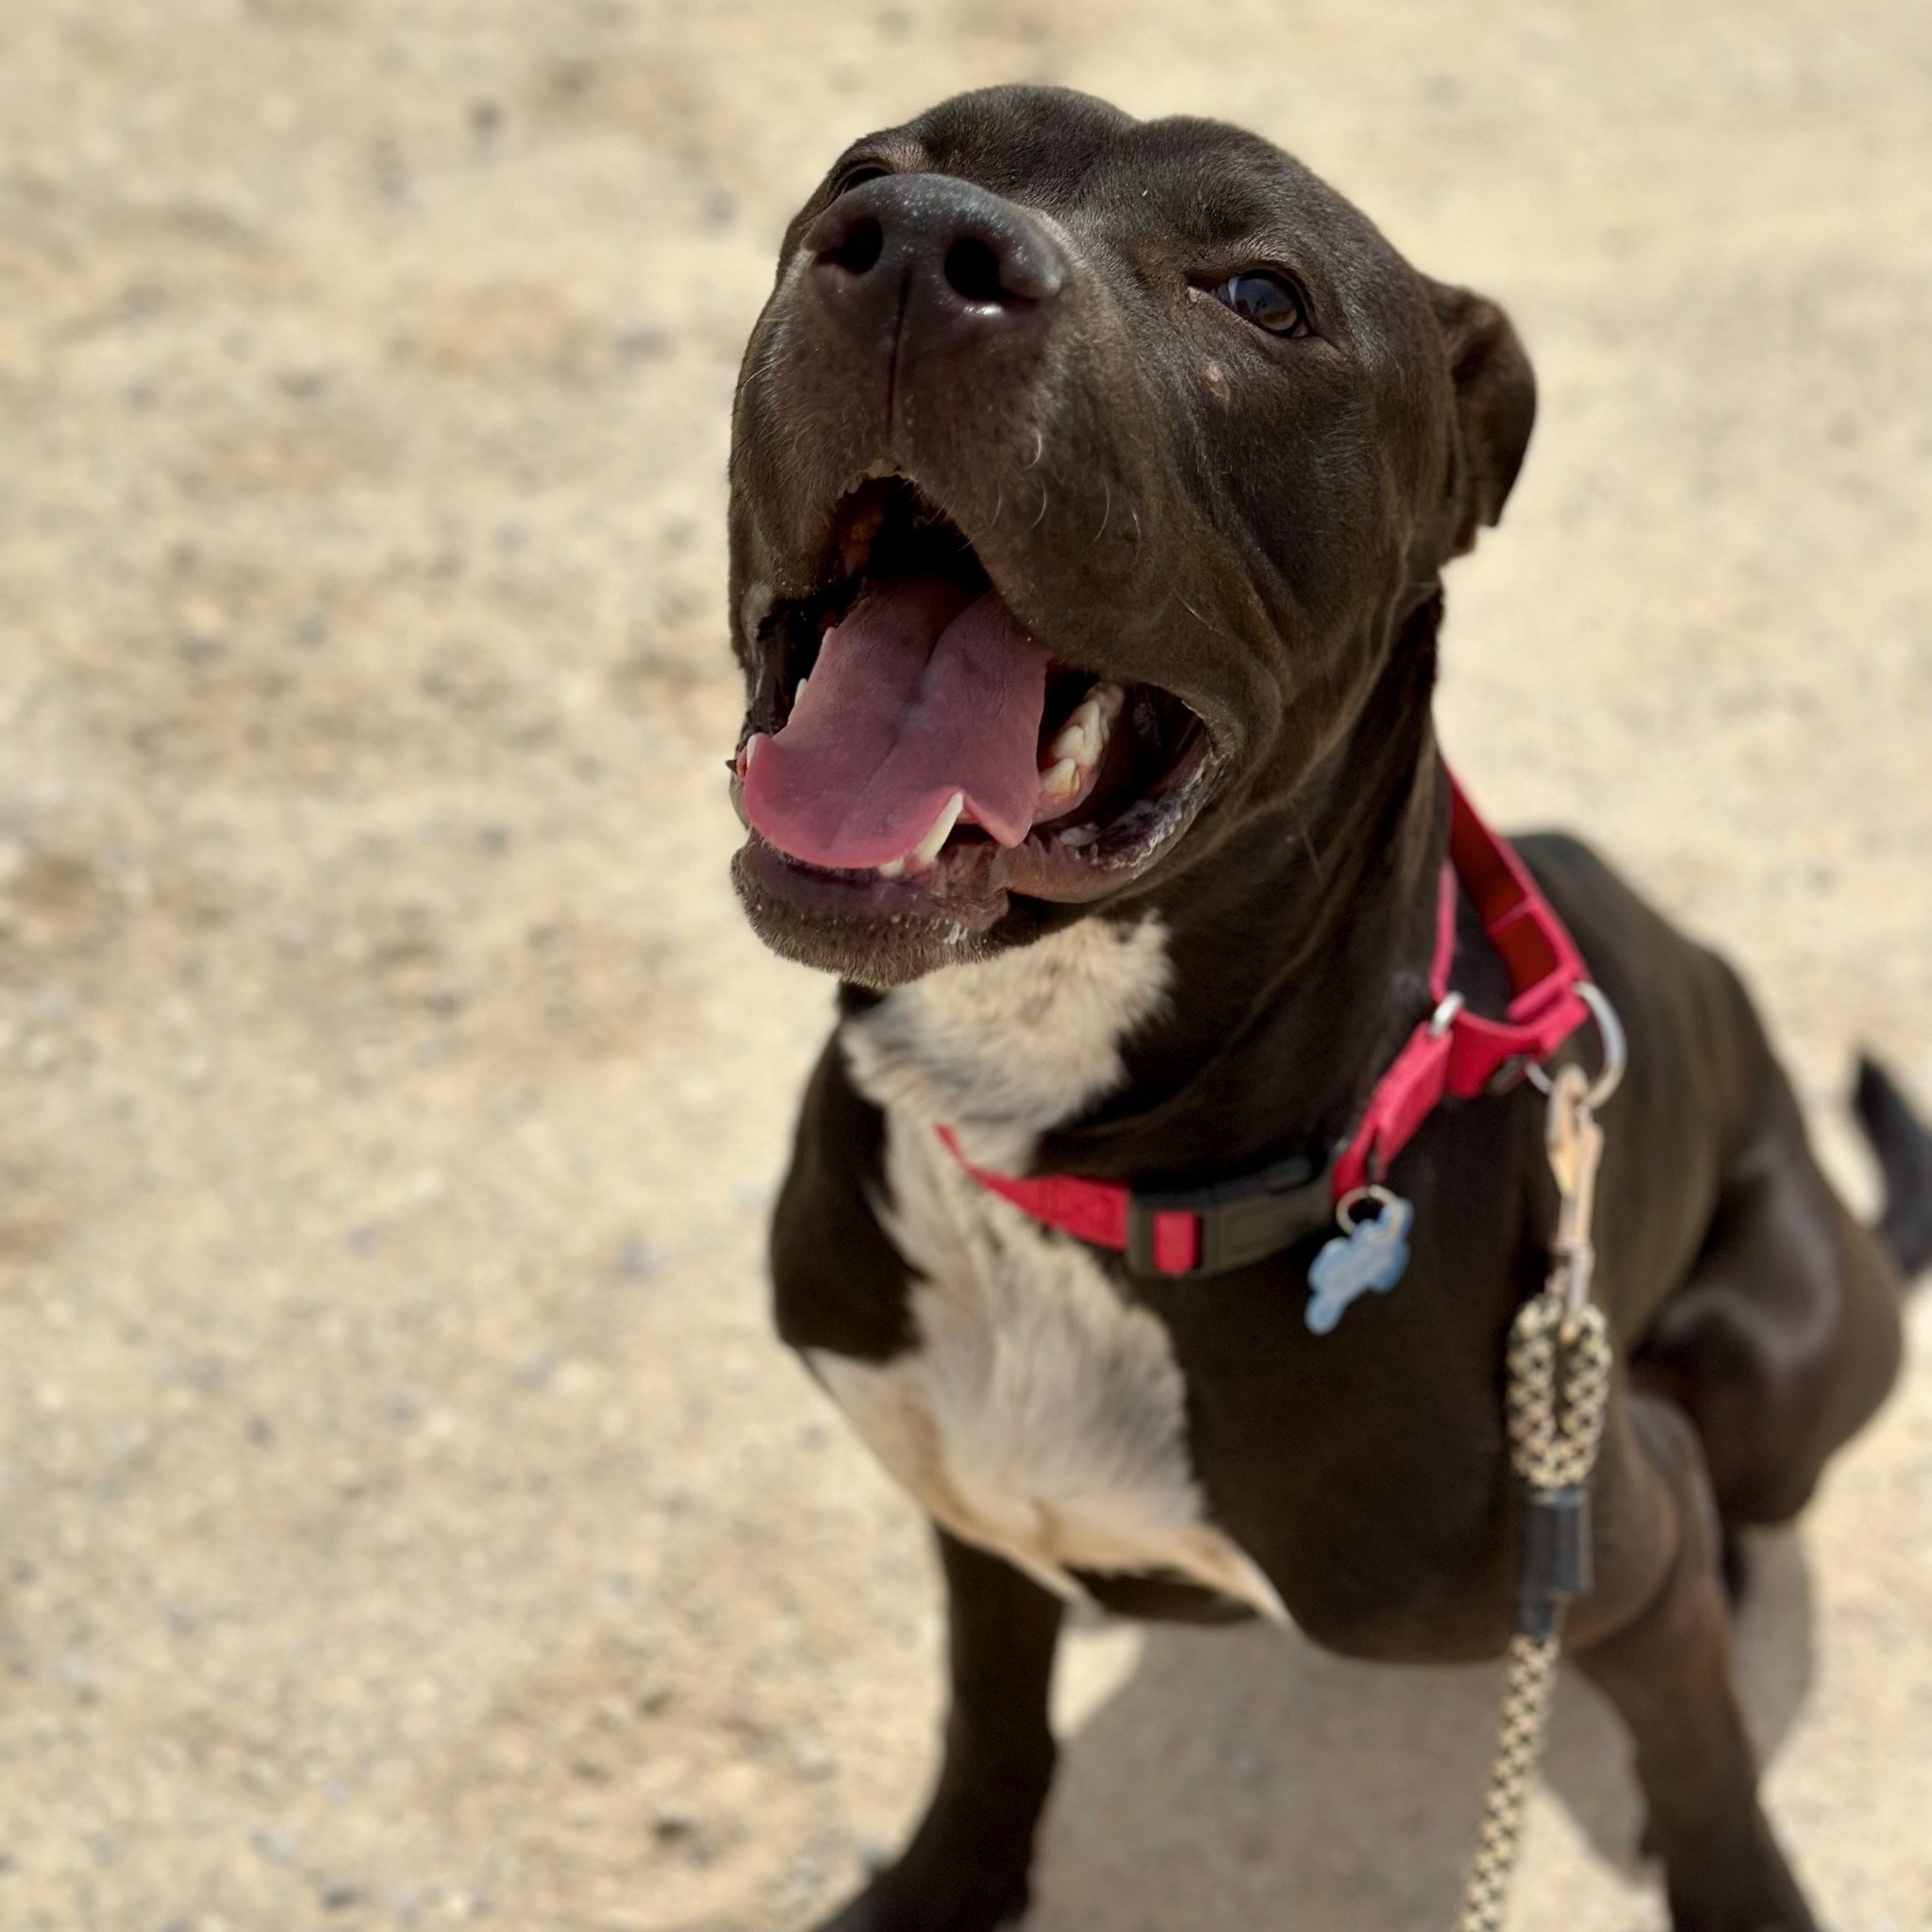 Big, bouncy Biscuit needs a foster shift- and stat. He&rsquo;s a fully vetted 3 year old gangly spazzy underdog who loves people and other dogs. If anything, he&rsquo;s got an excess of joie de vivre and would love a yard to romp in, an active person